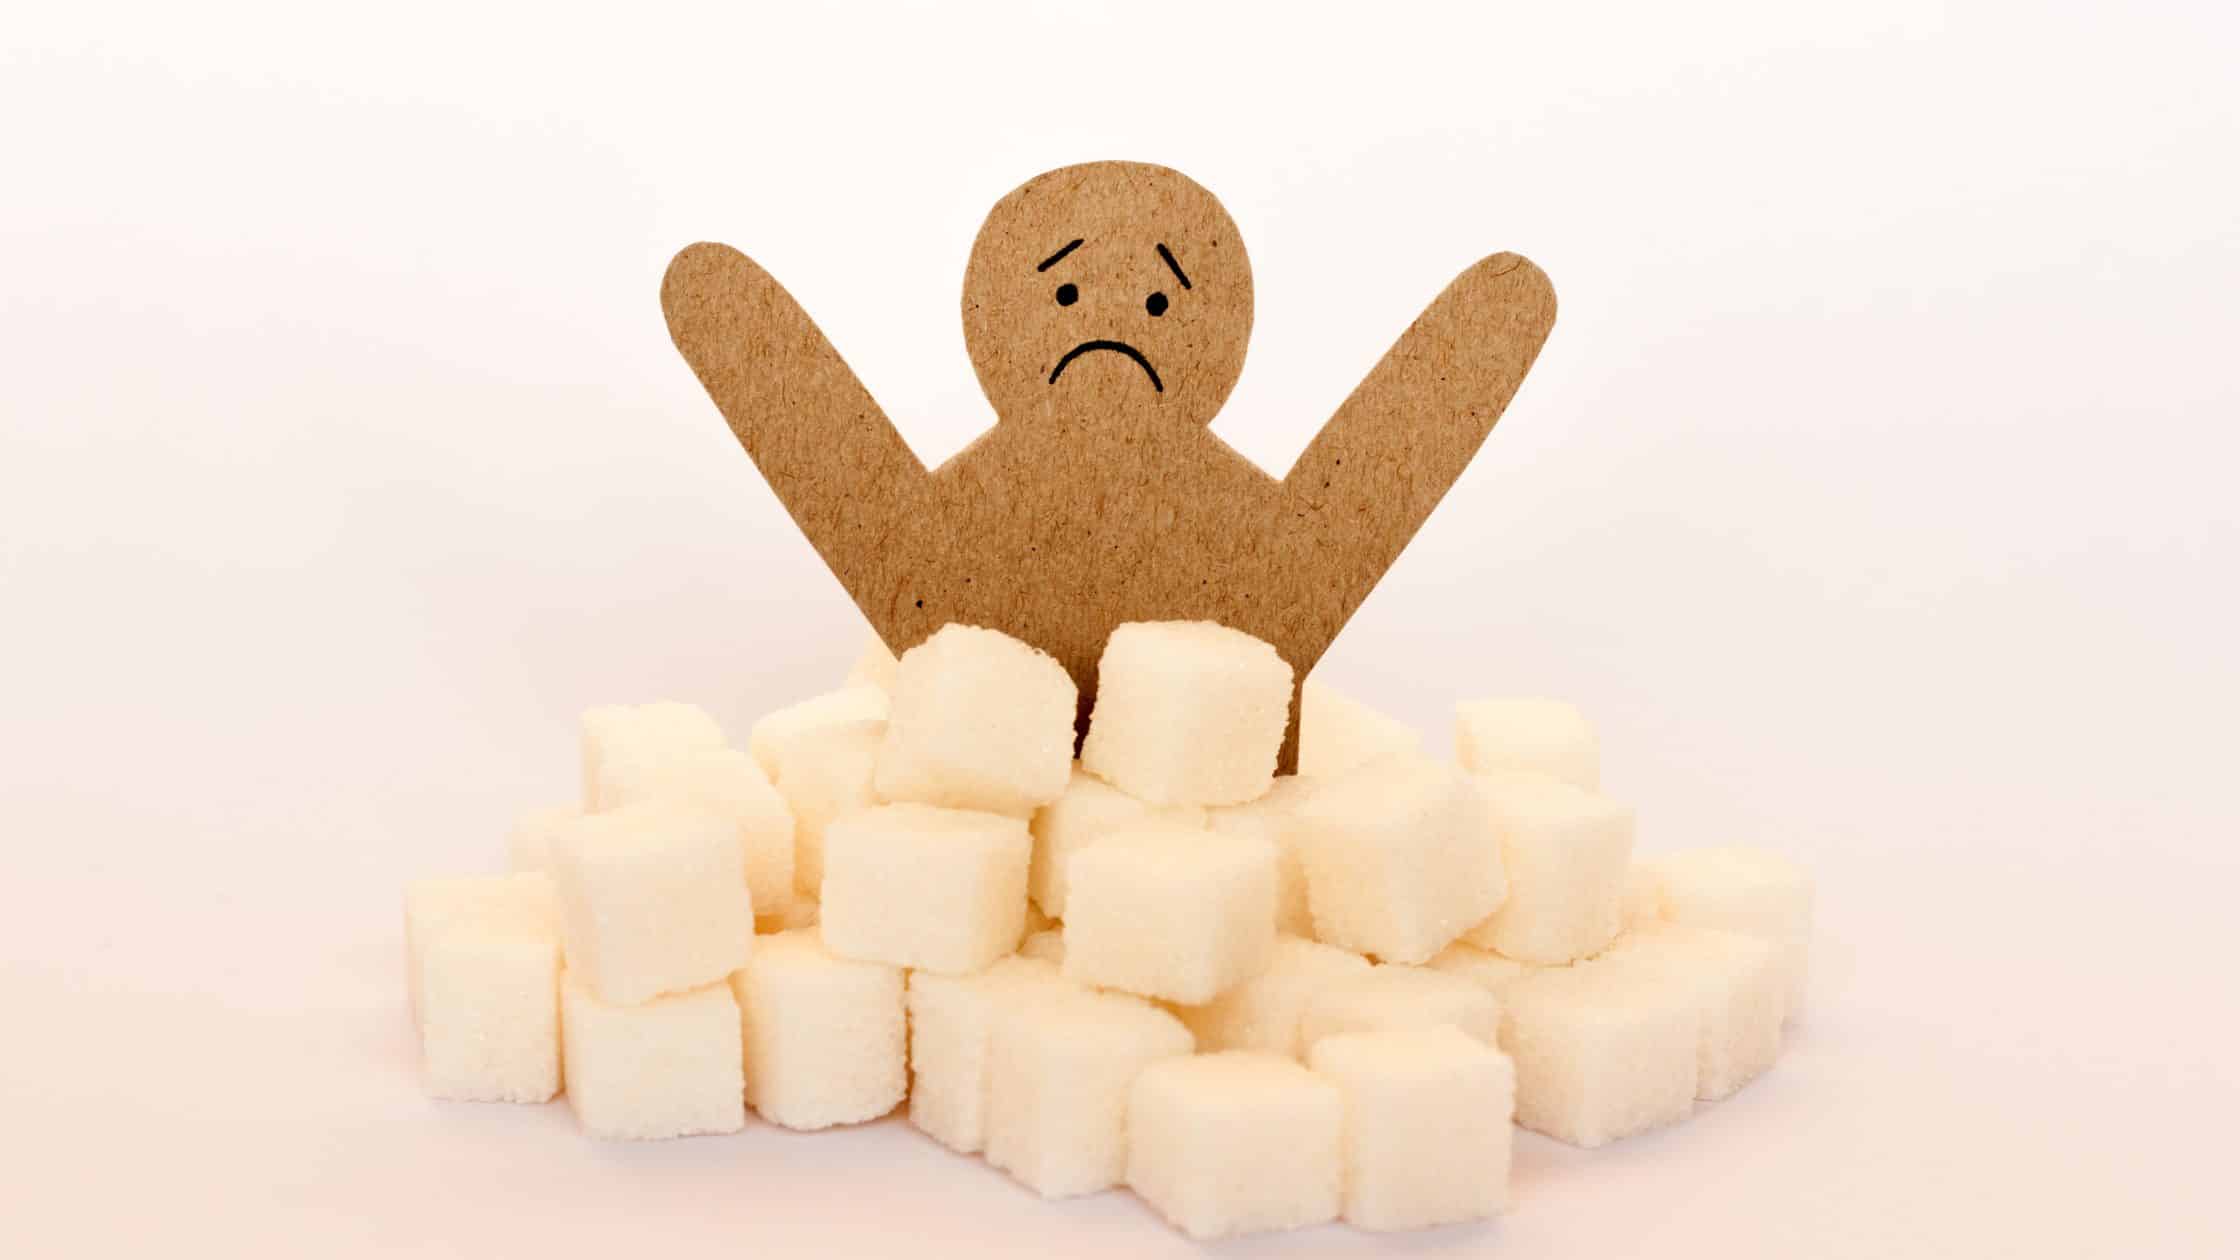 Stick figure surrounded by sugar cubes representing insulin resistance